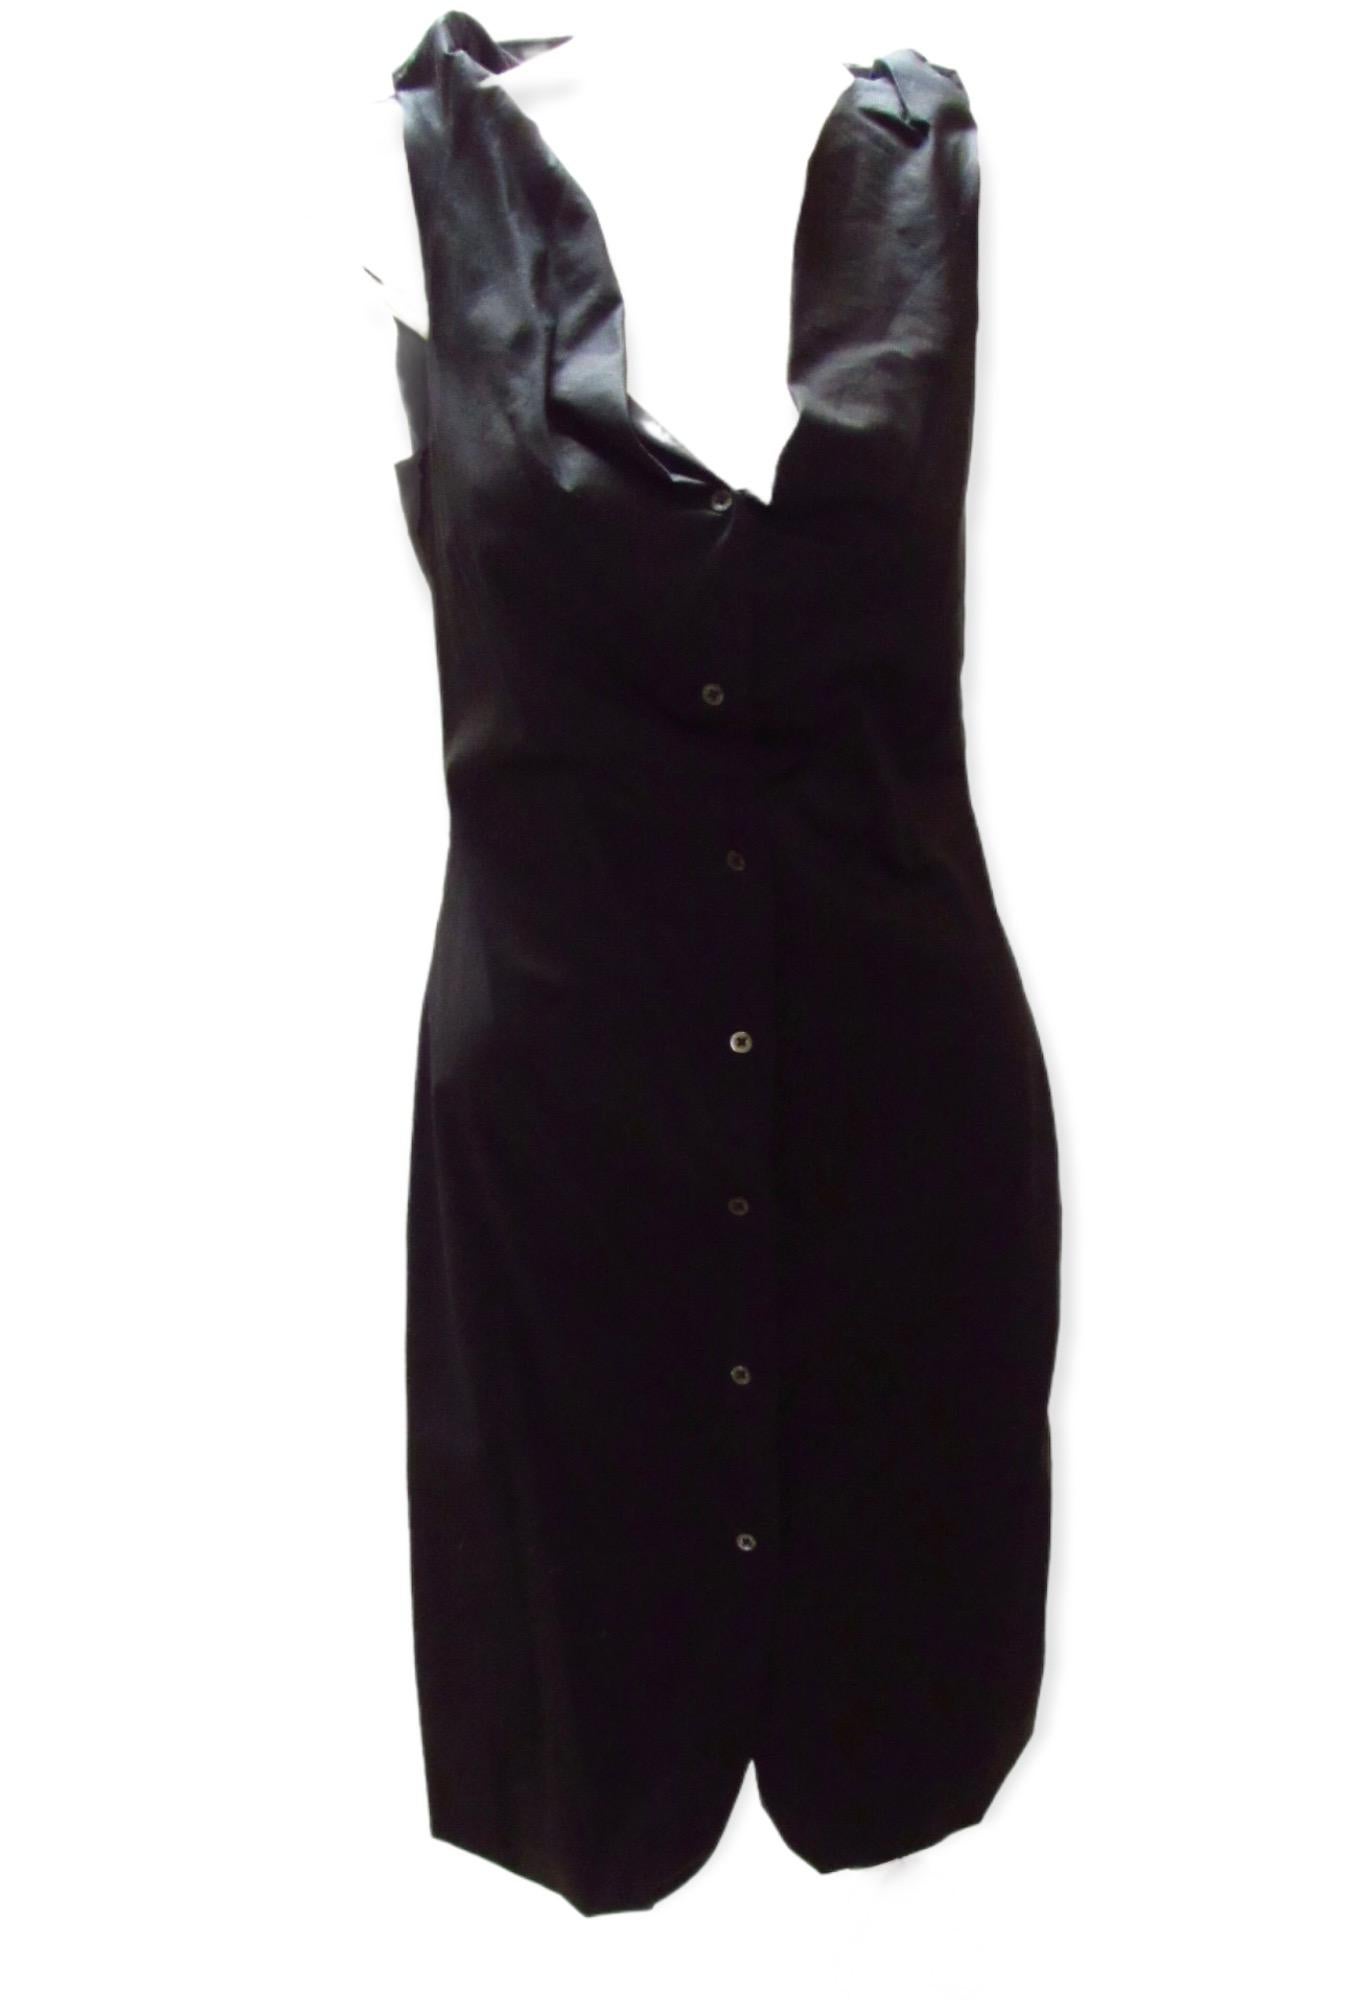 A gorgeous little black dress from vintage Vivienne Westwood Anglomania. A button down front dress that will hug your curves and 